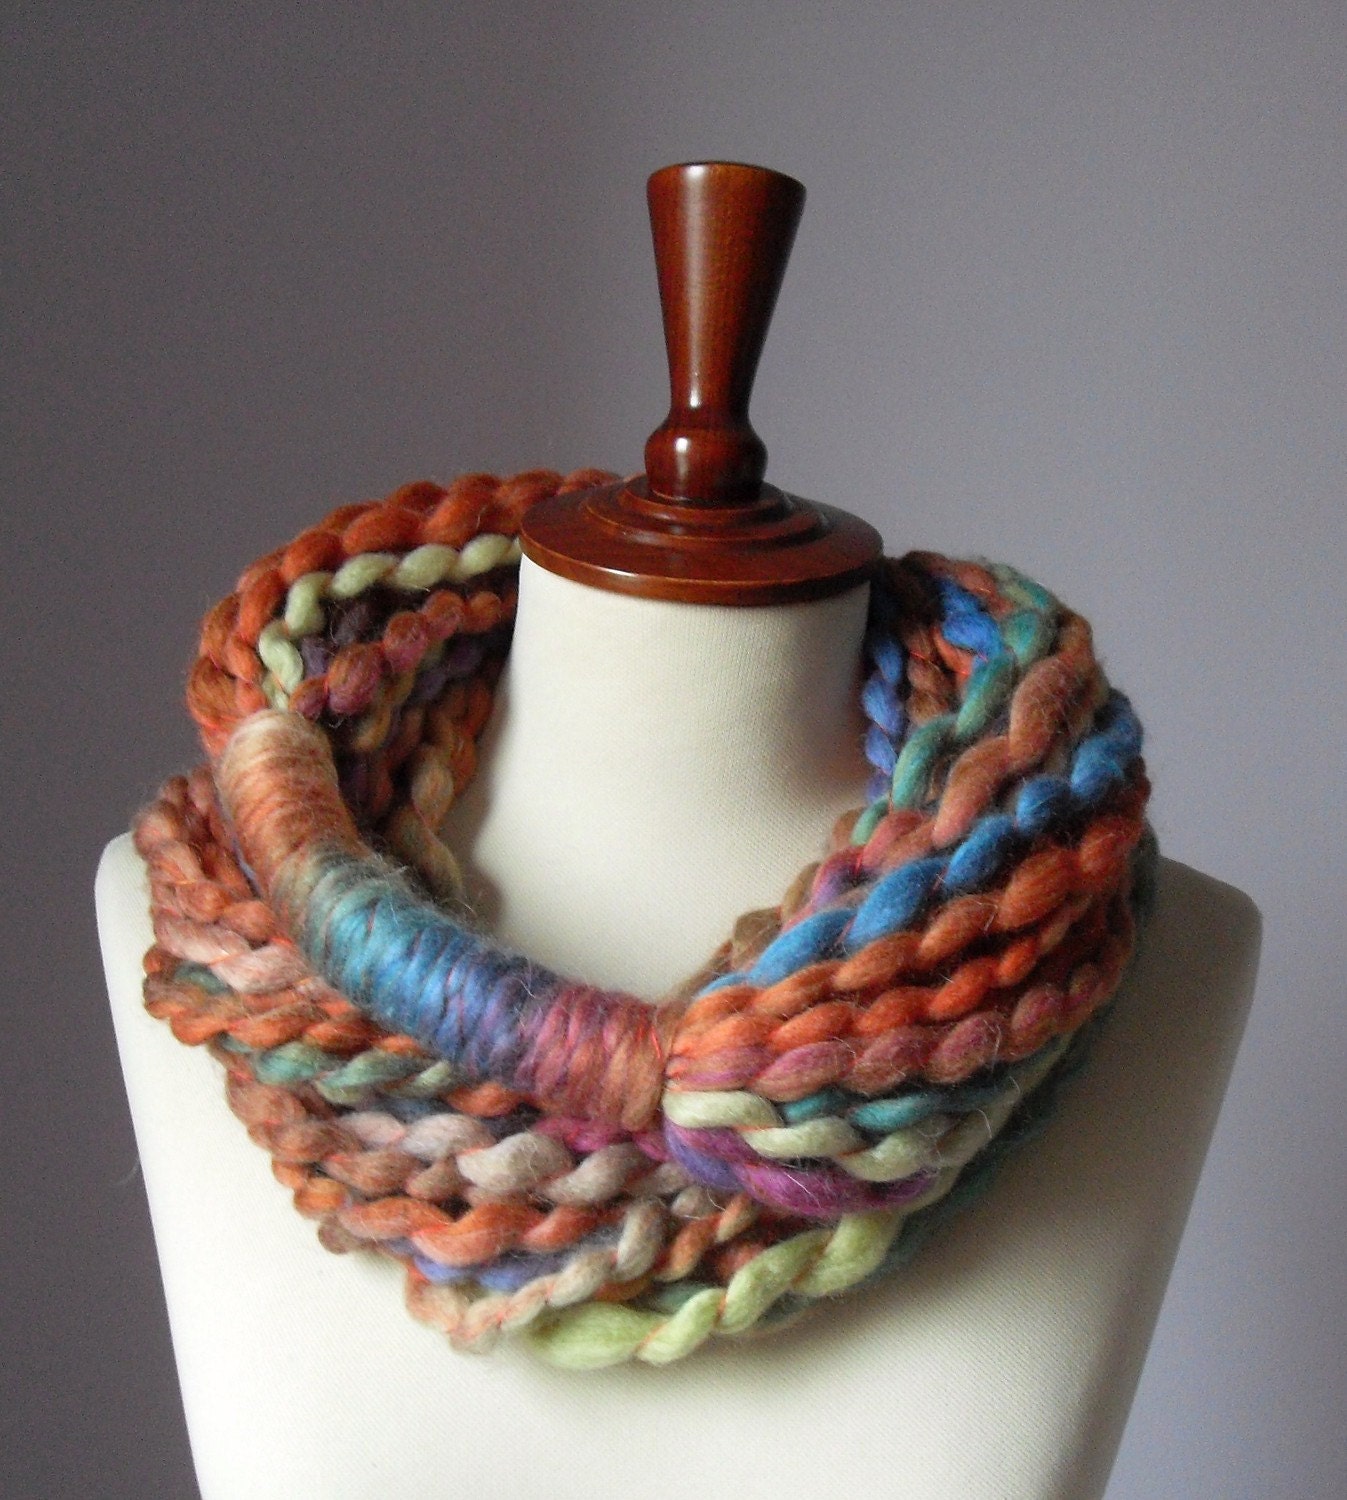 MINI LOOP SCARF - Reserved for Monique5766